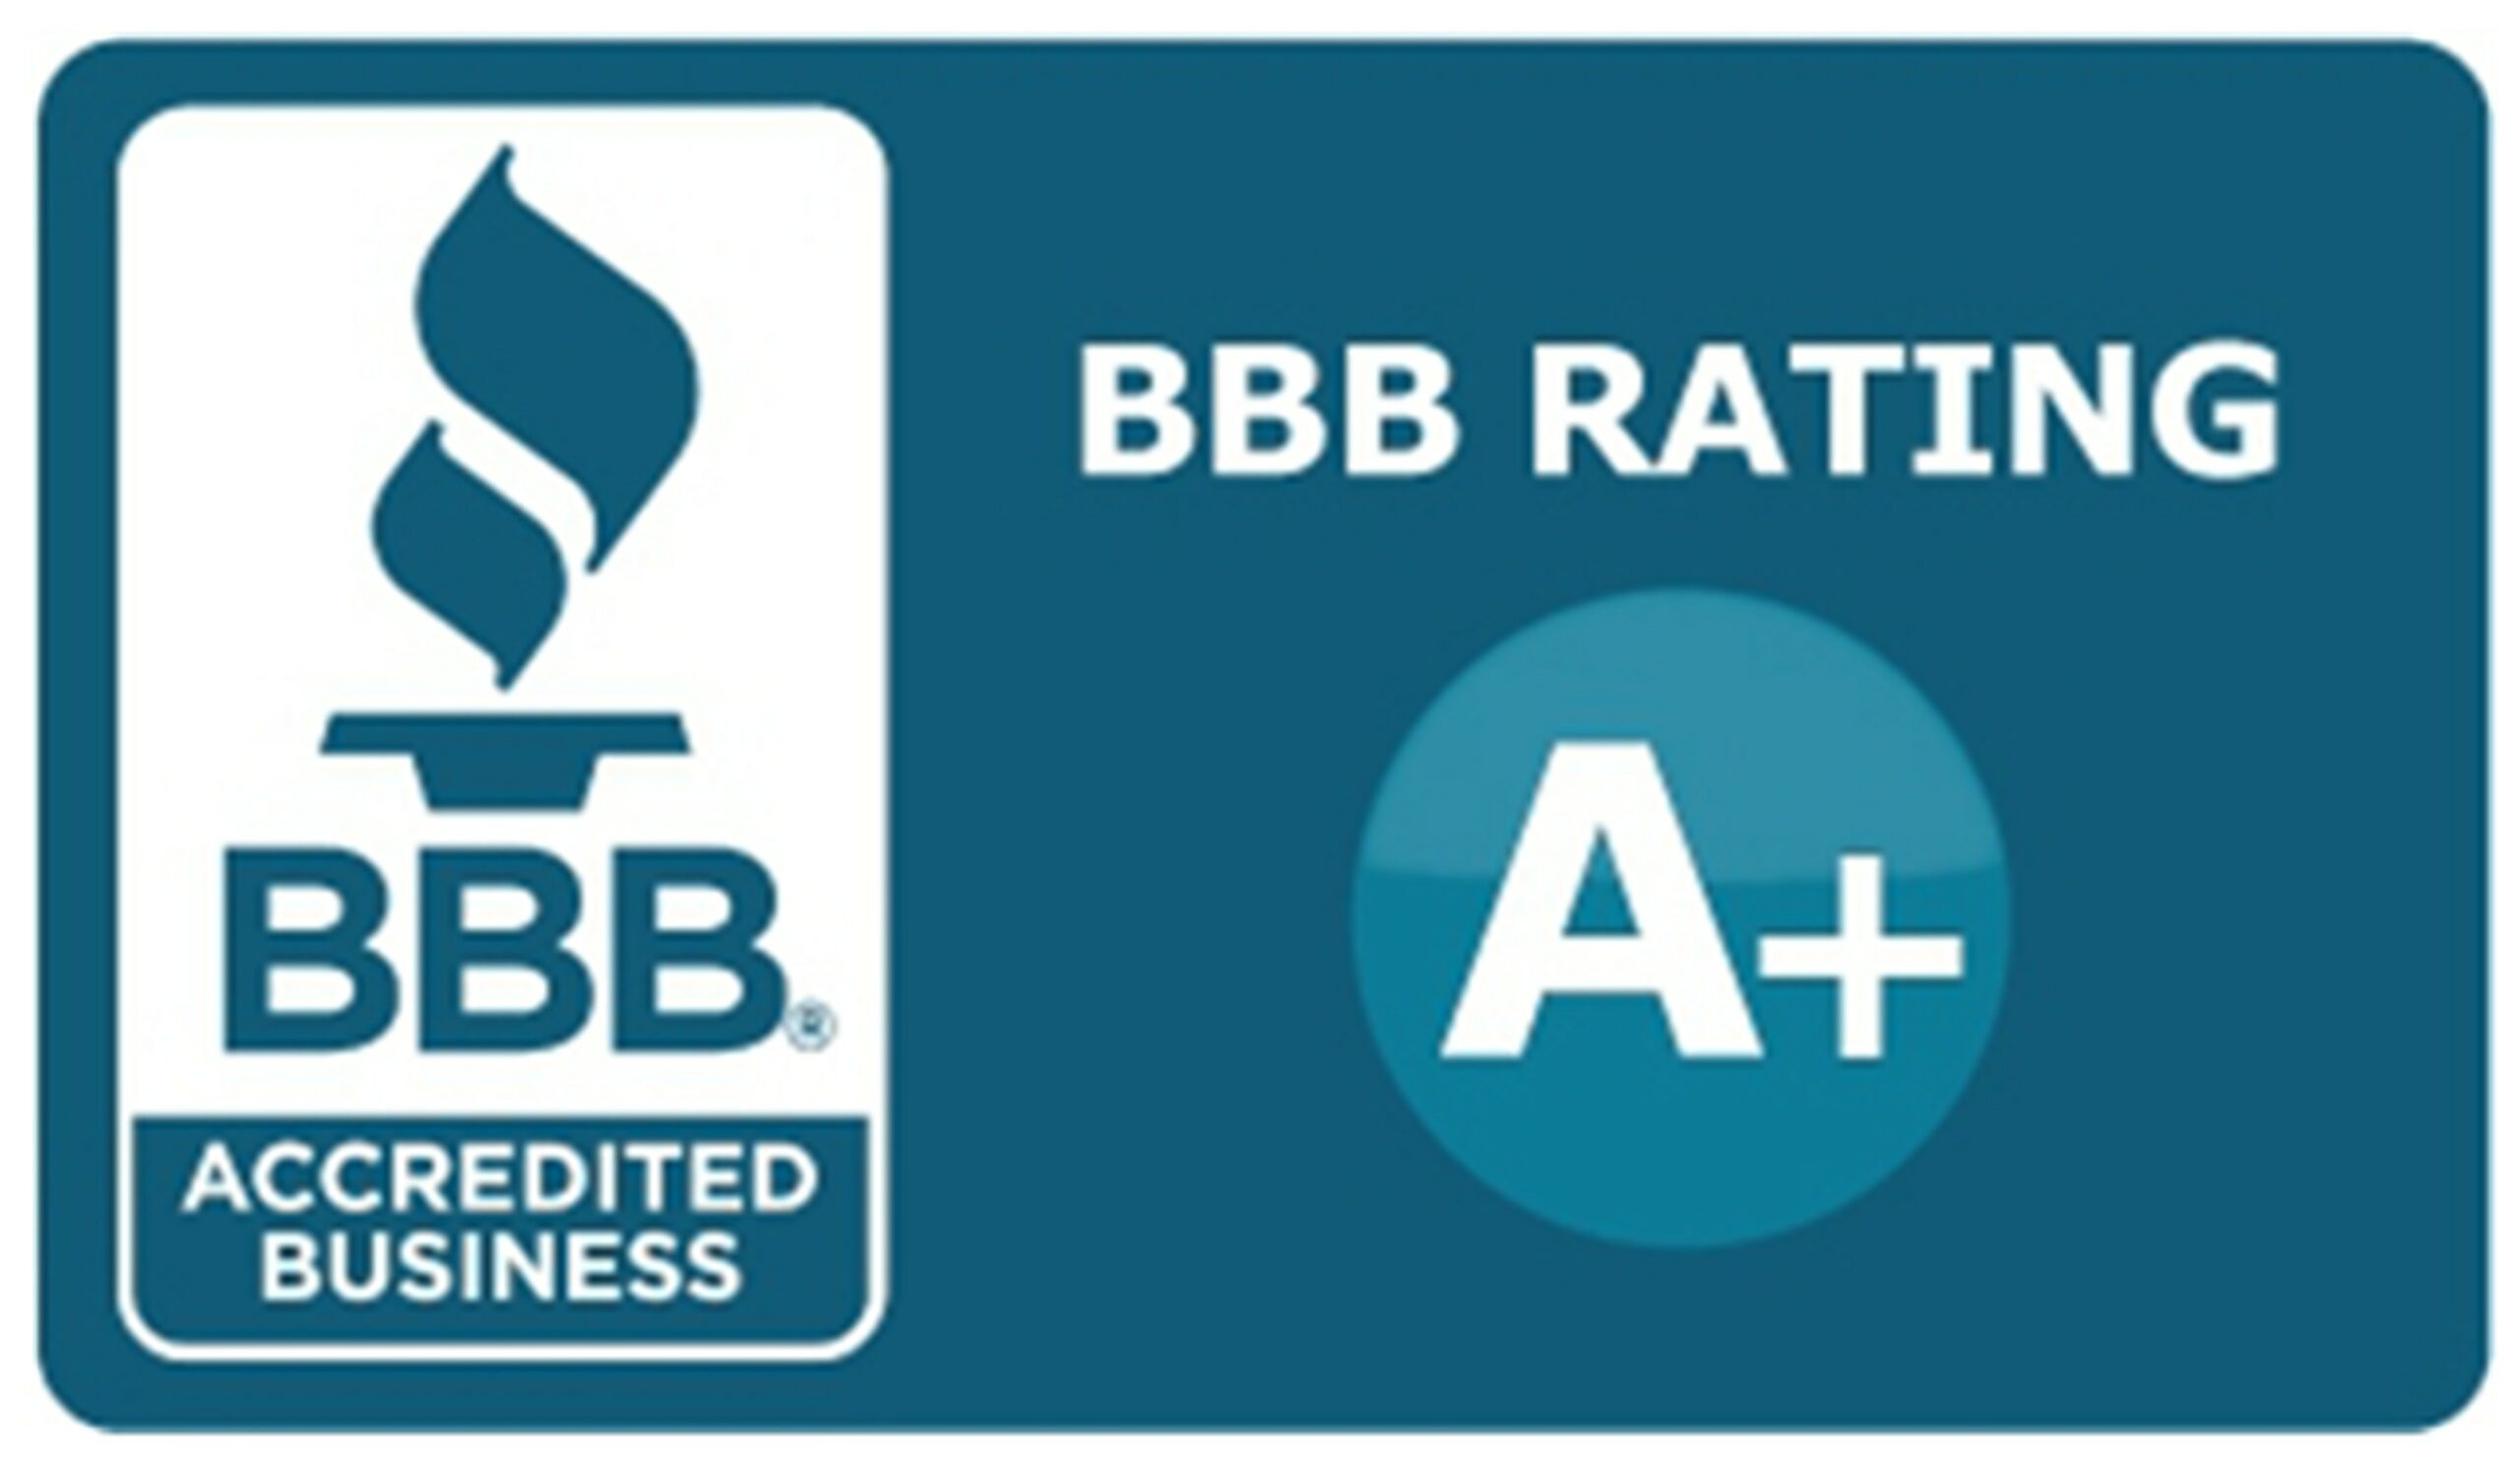 Better Business Bureau A+ Rating and Accredited Business